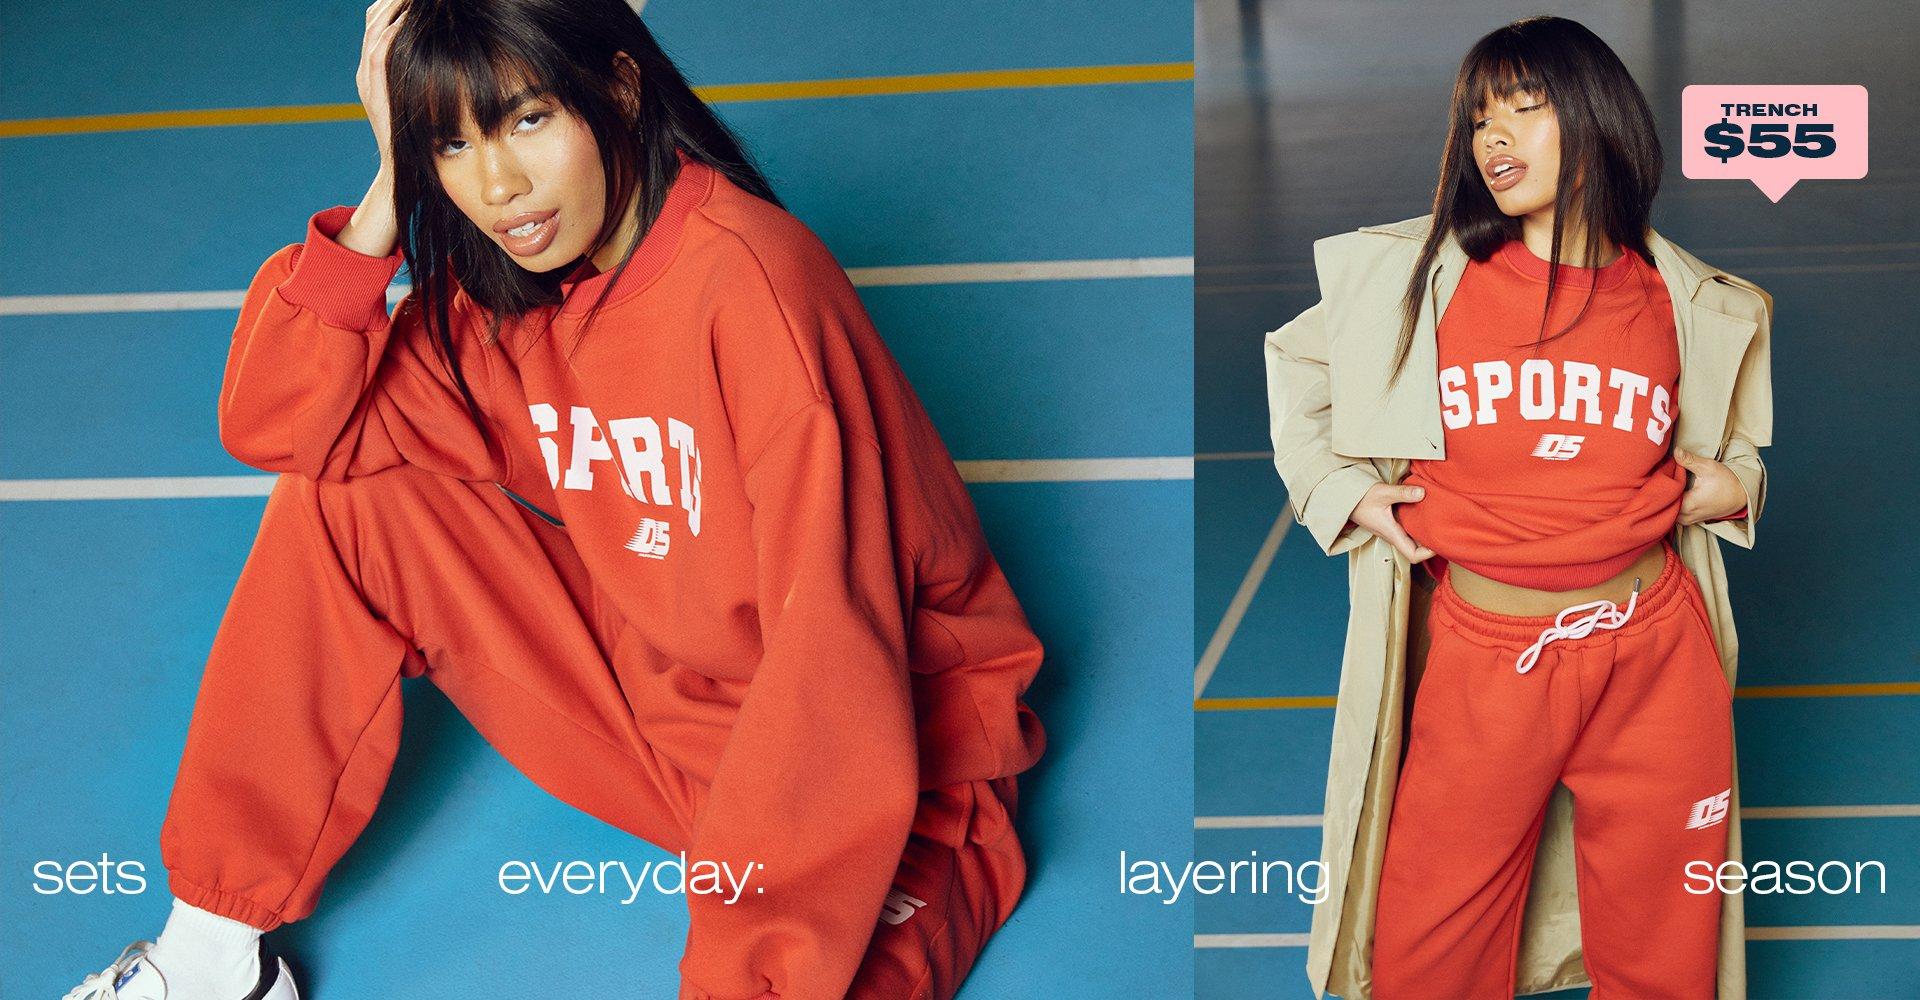 Sets everyday: Layering season
                    From $55